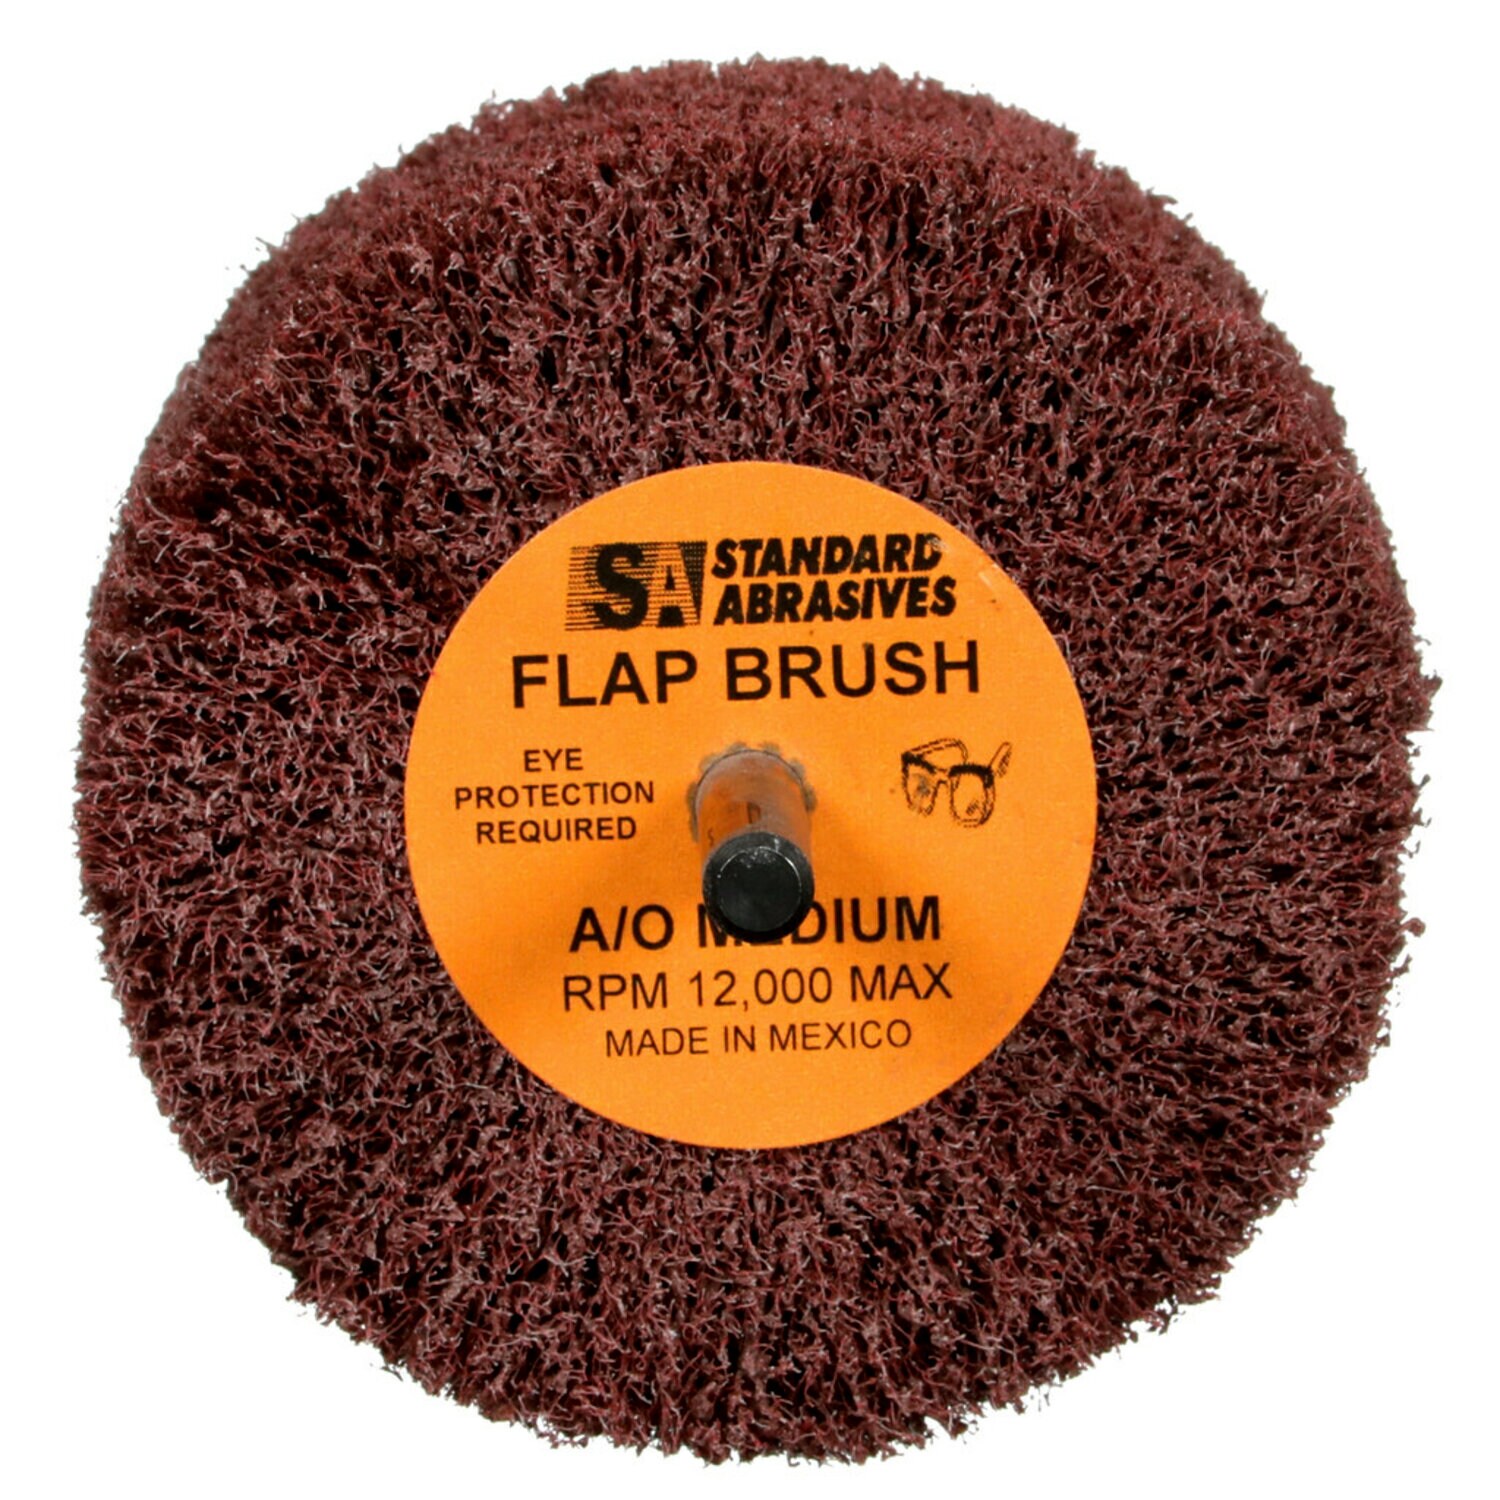 7000122218 - Standard Abrasives Buff and Blend GP Mounted Flap Brush, 875501,
Medium, 3 in x 2 in x 1/4 in, 5/Carton, 50 ea/Case